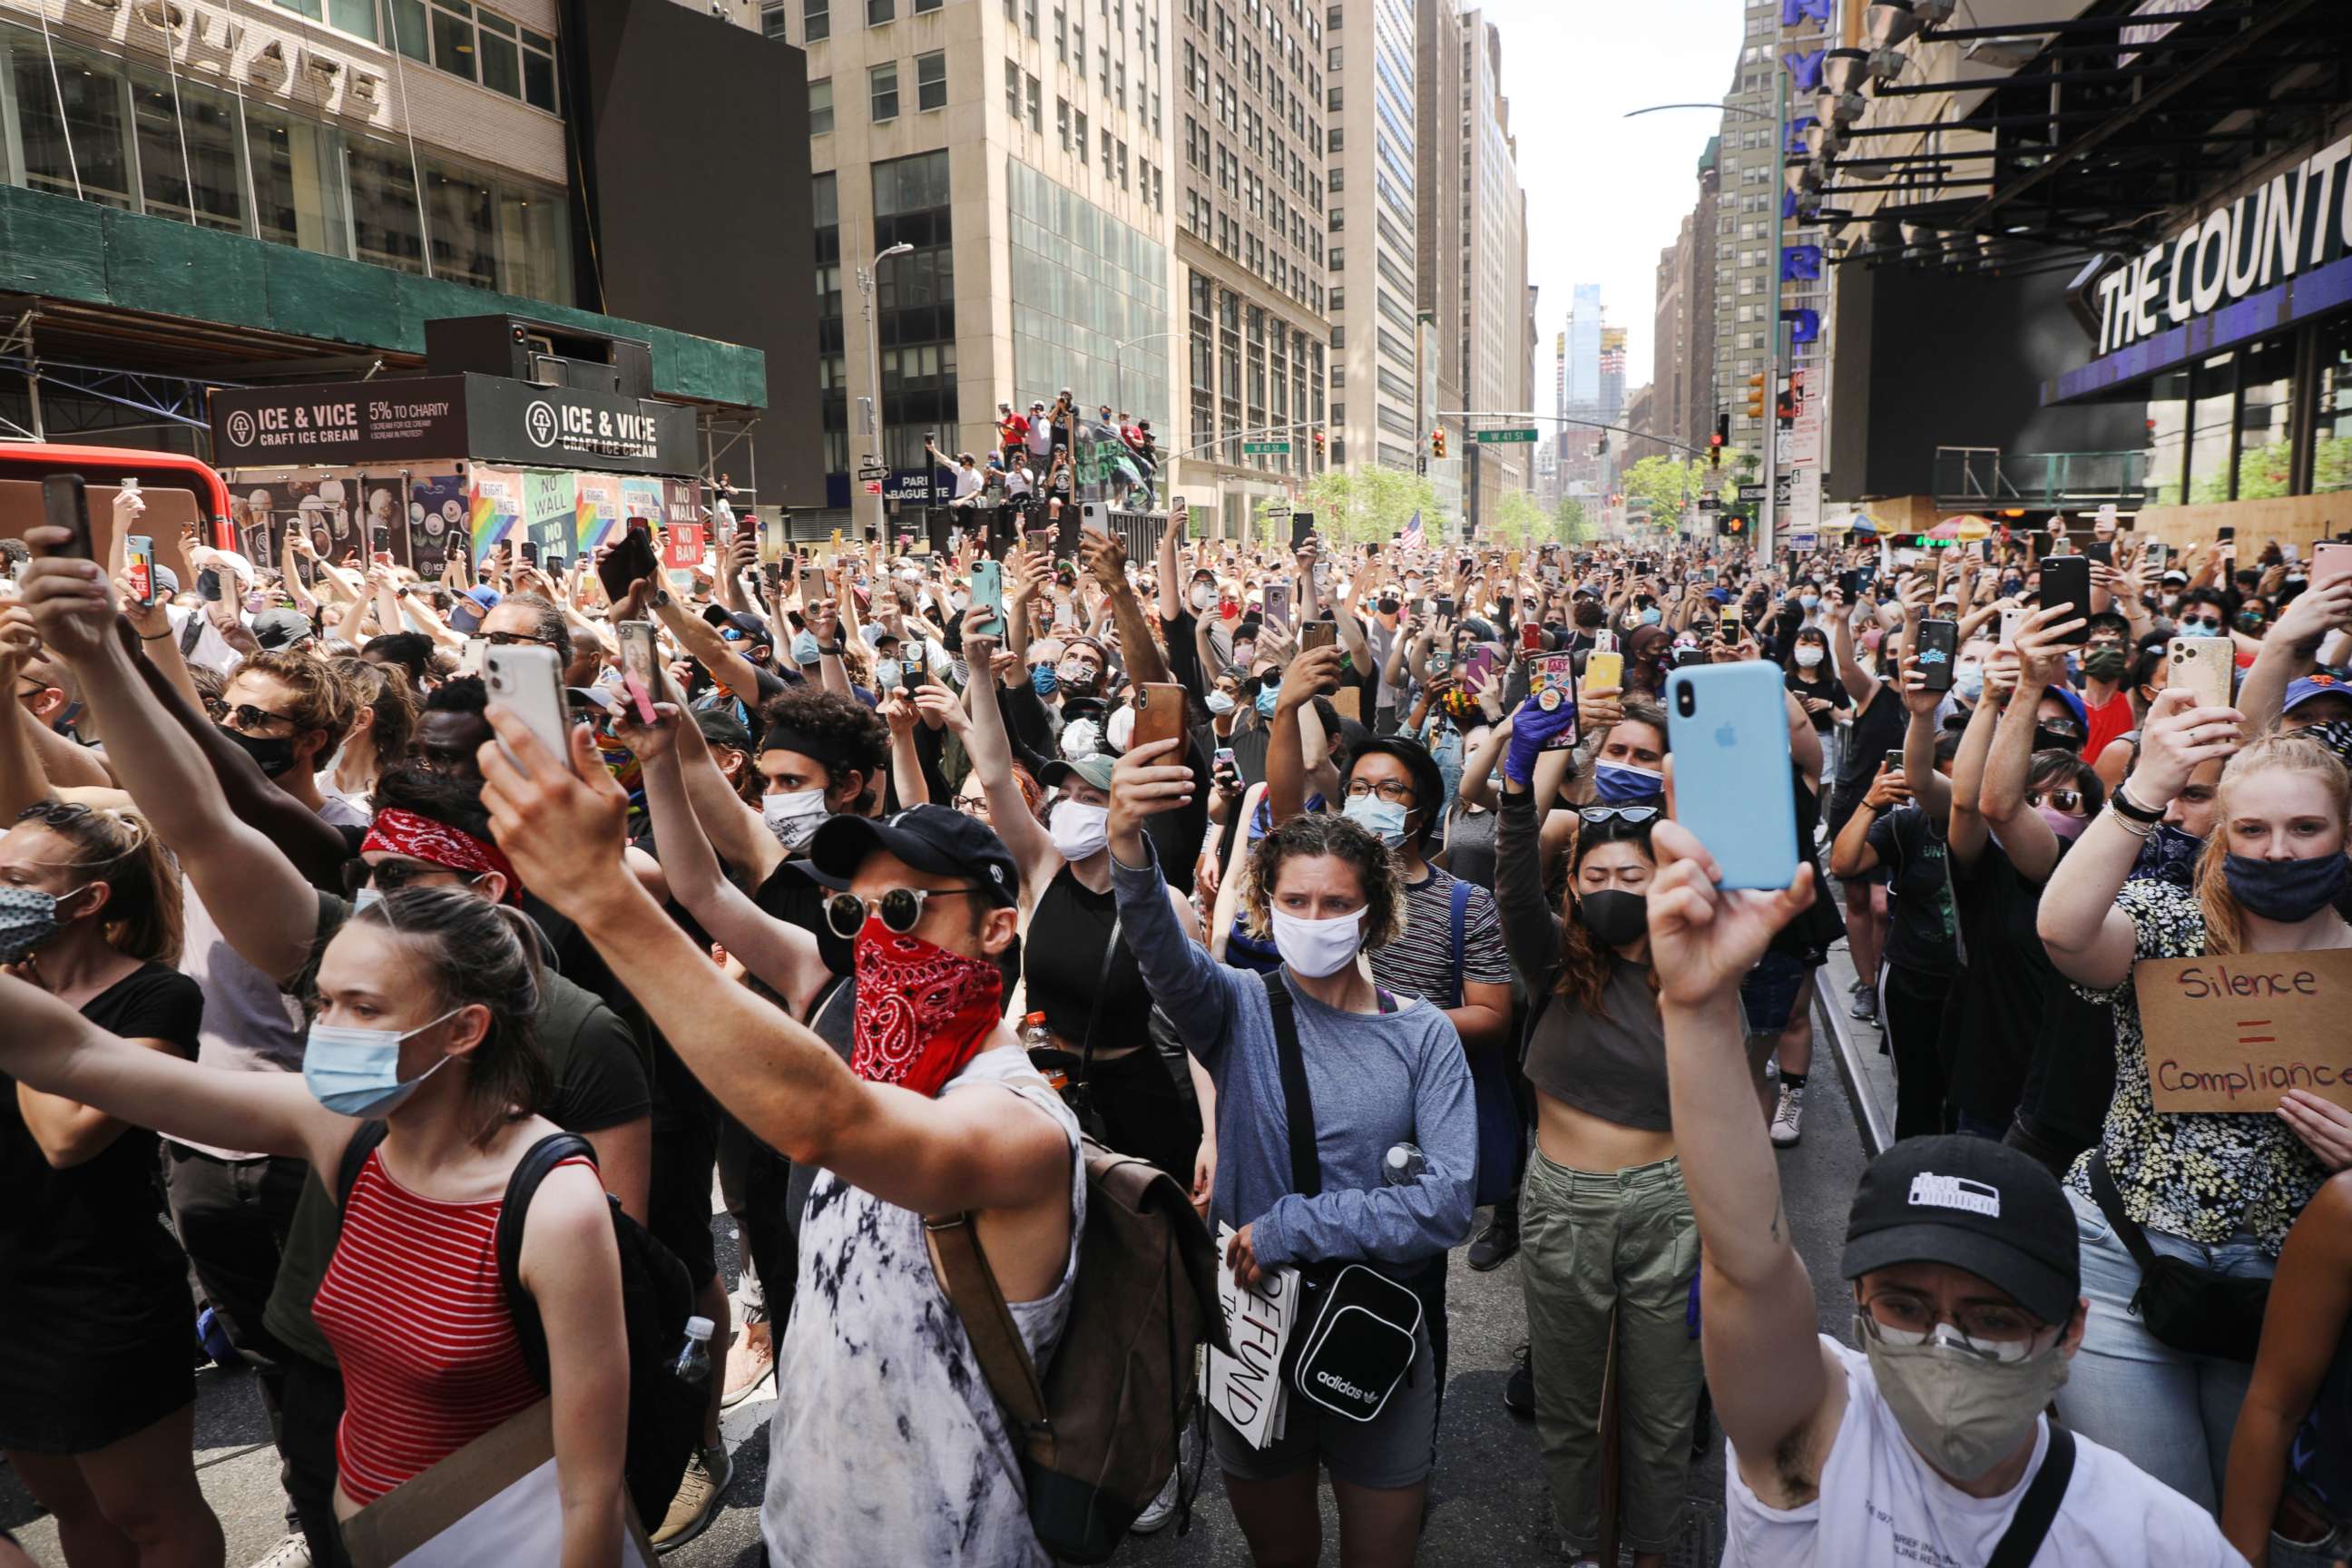 PHOTO: Hundreds of protesters march in Manhattan over the death on May 25 of black man George Floyd while in the custody of Minneapolis police, June 7, 2020, in New York.